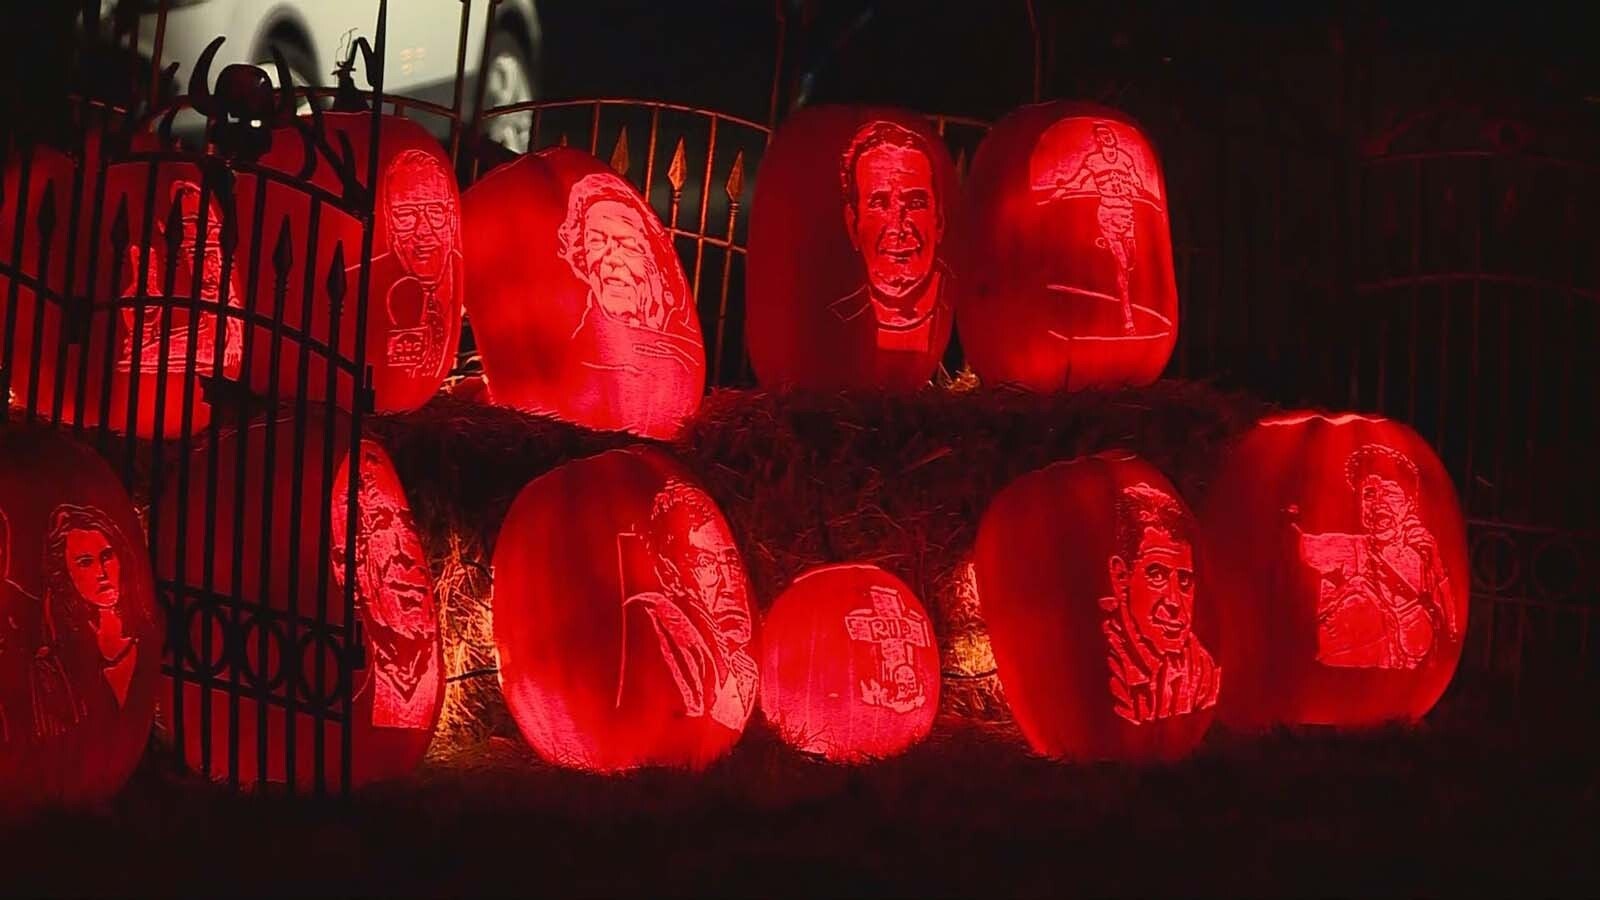 Each year, Dave Cunningham's jack-o-lantern display features celebrities who've died since the prior Halloween.